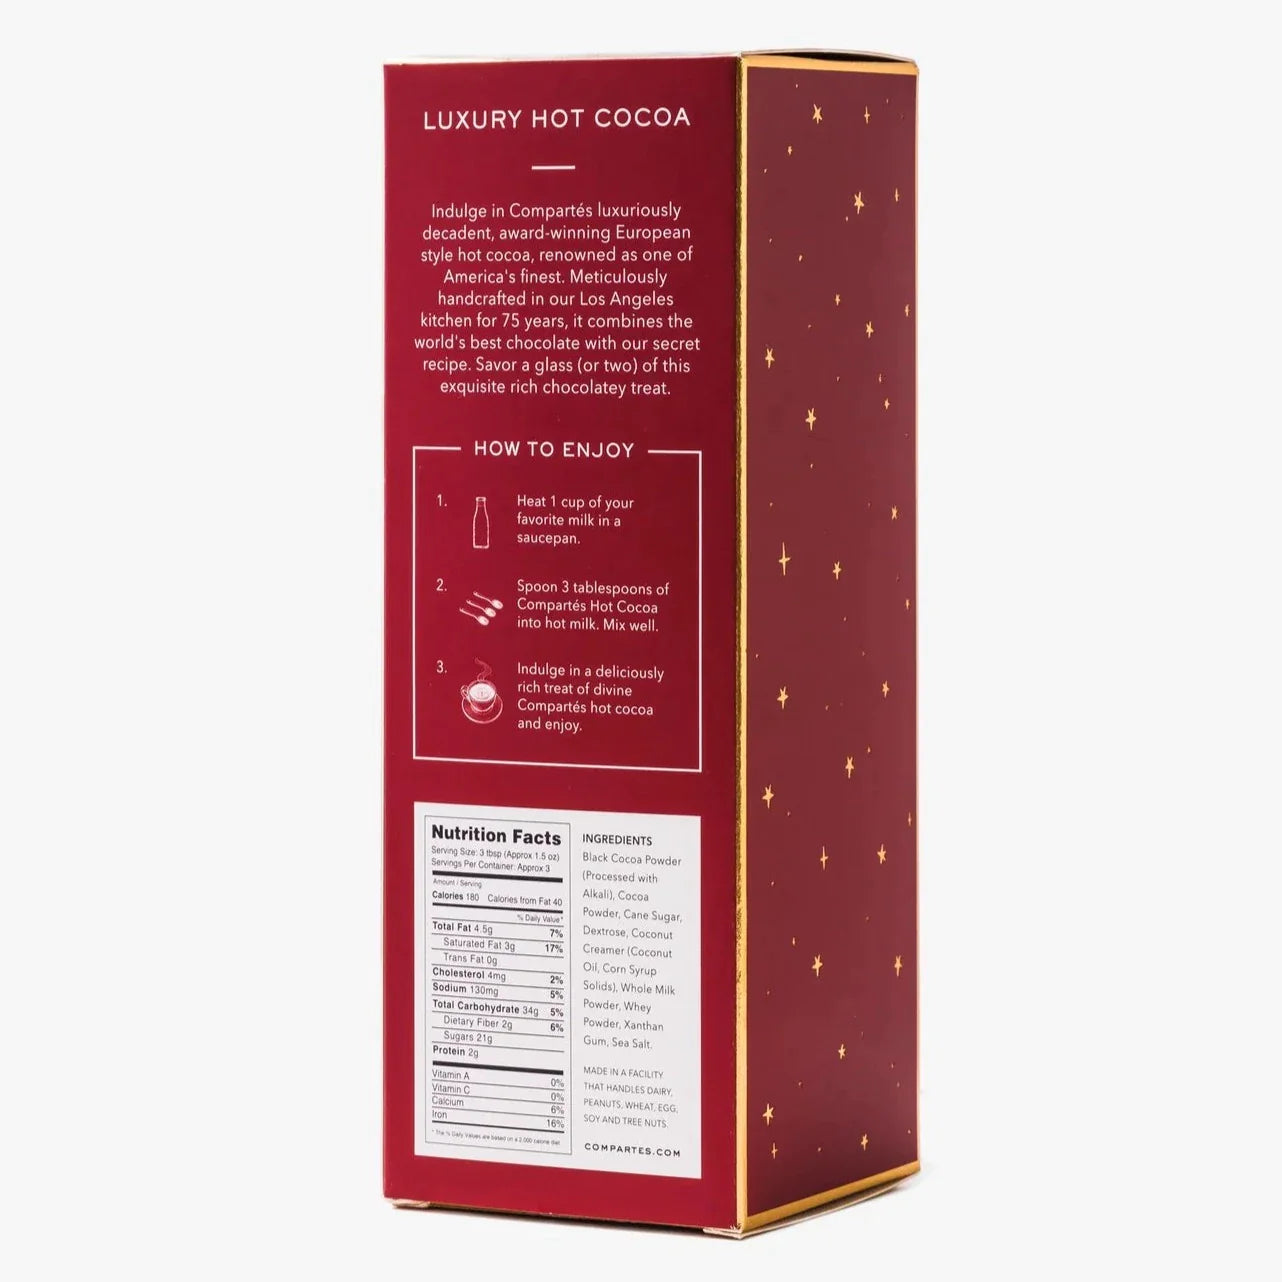 The back of the red box with description of product and with Nutrition Facts. 